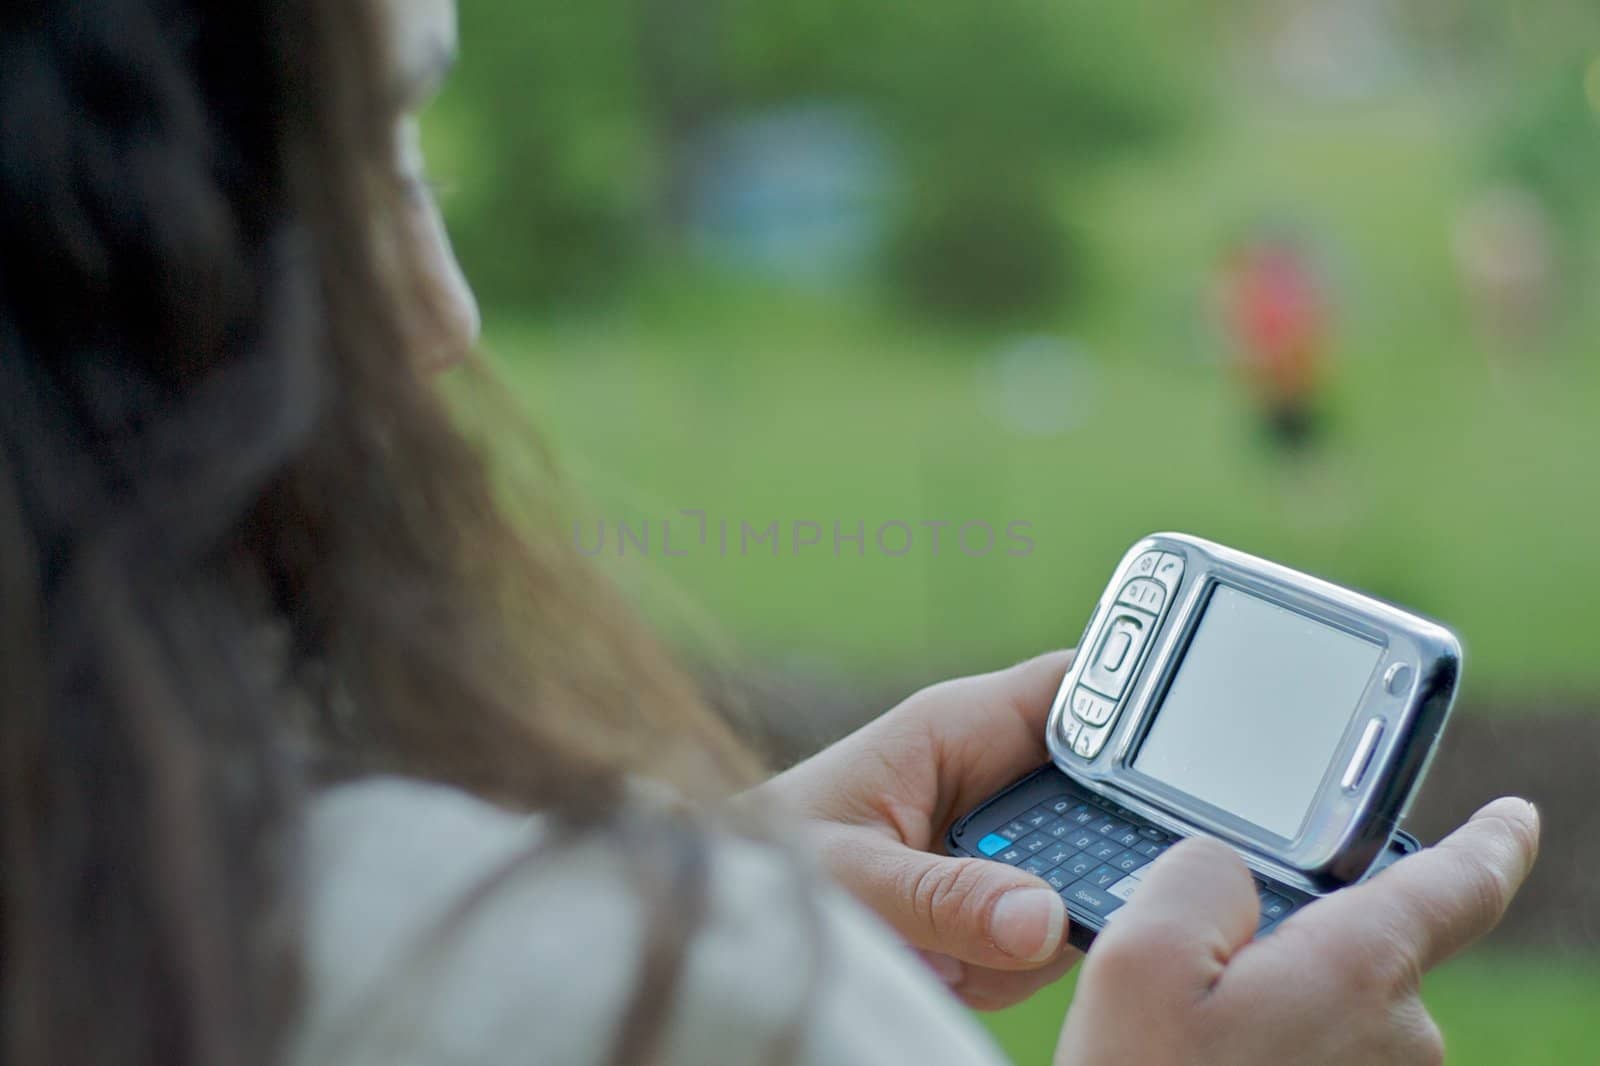 A young woman texting on a smart-phone with a fully QWERTY keyboard